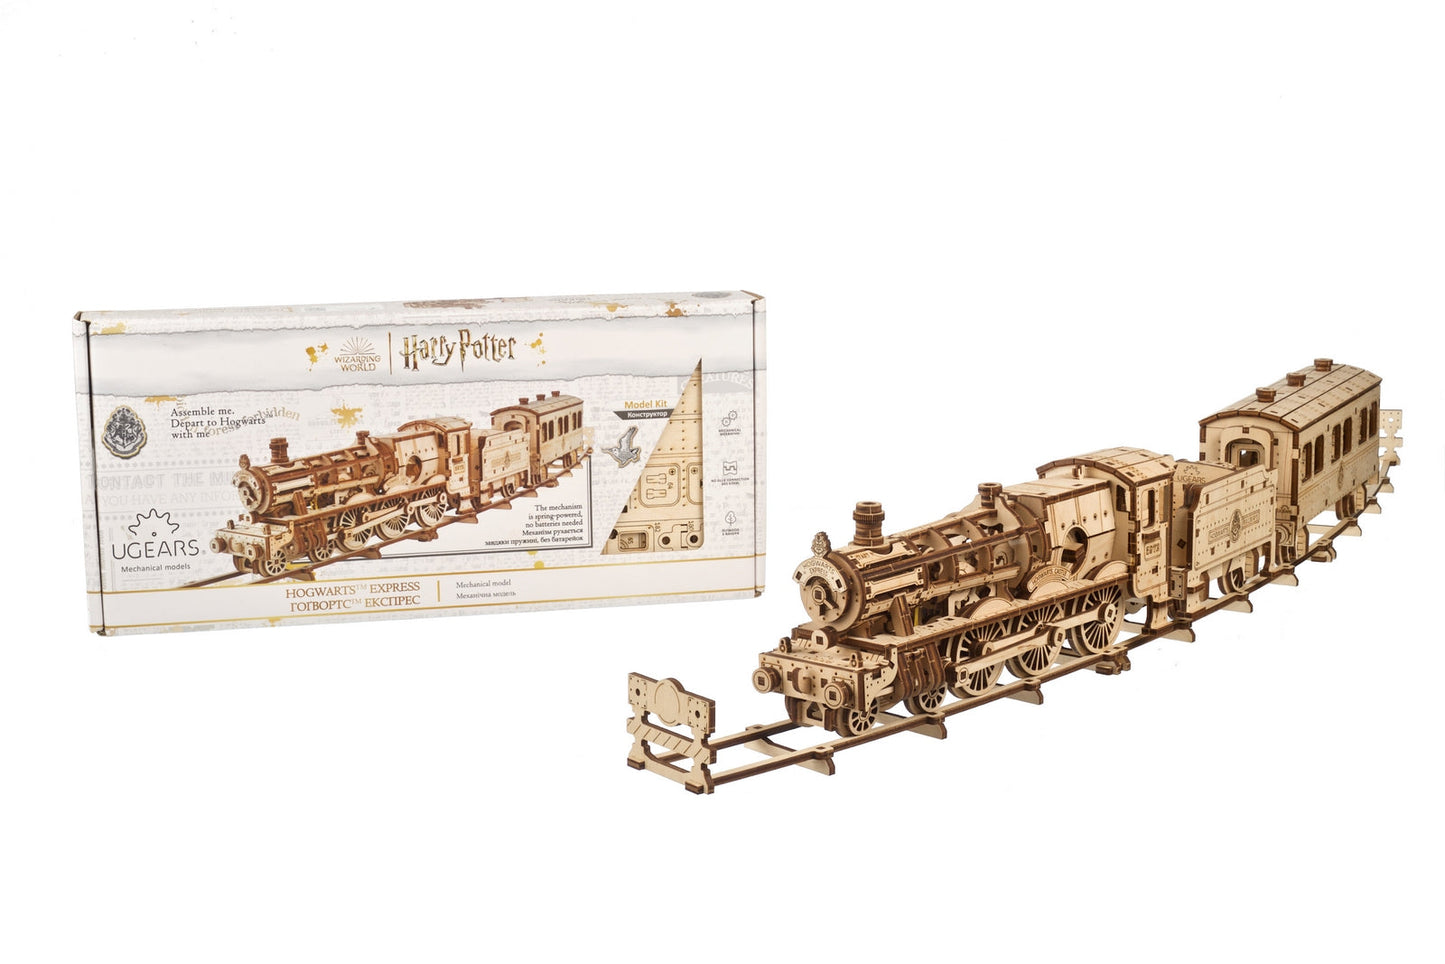 Ugears Harry Potter Series - Hogwarts™ Express Train ★Mechanical 3D Puzzle Kit Model Toys Gift Present Birthday Xmas Christmas Kids Adults